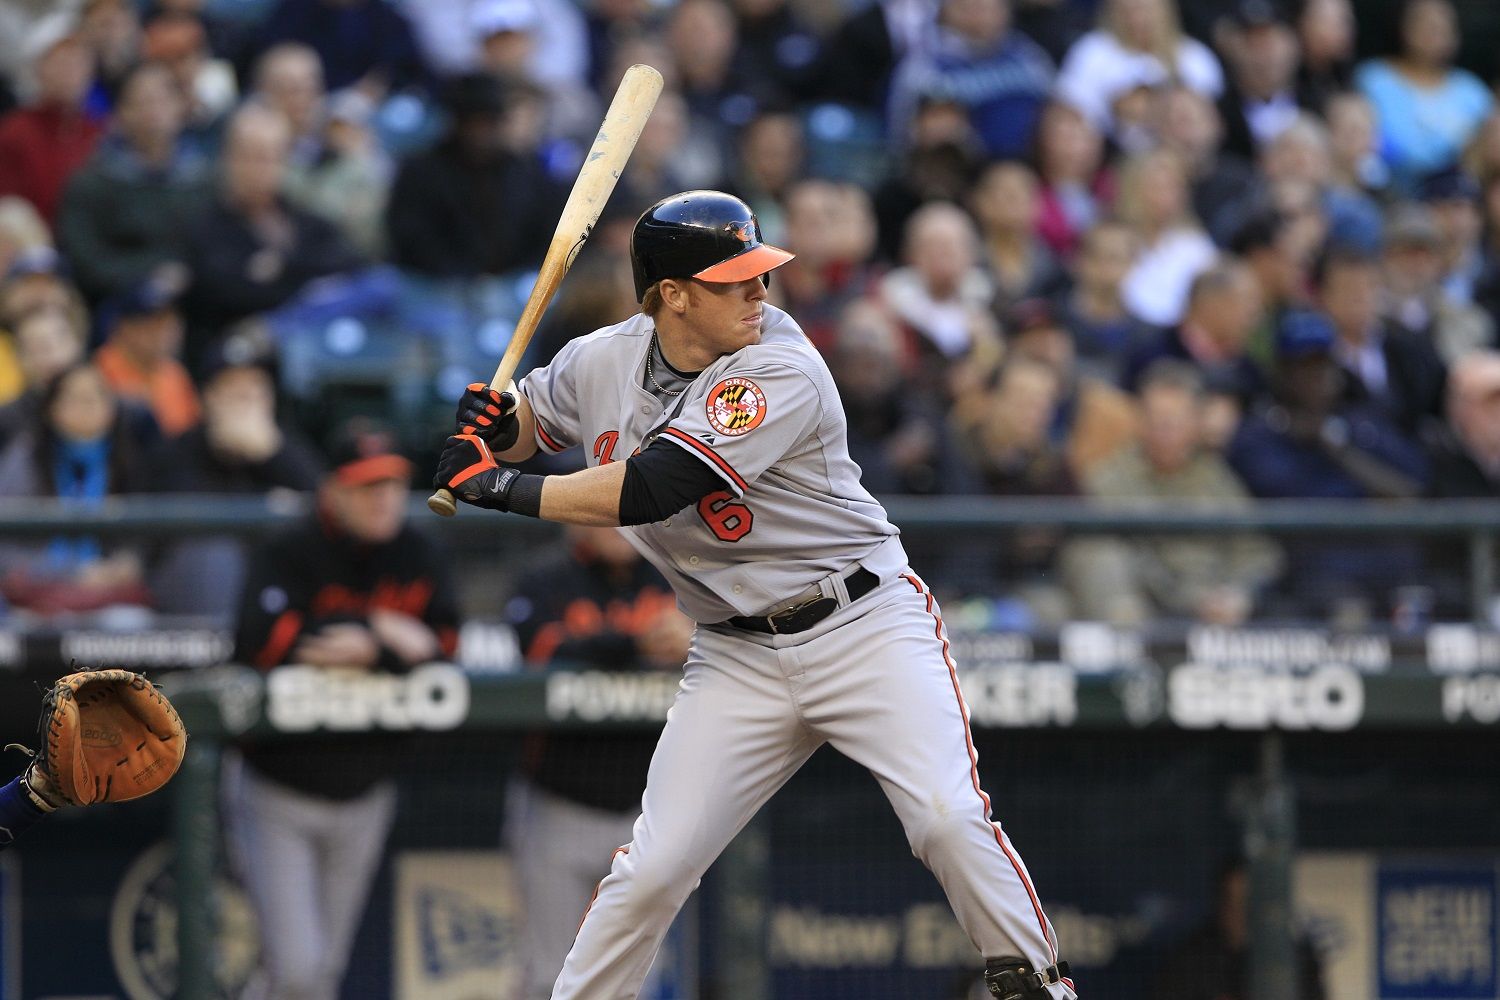 Baltimore Orioles' Justin Turner in action during a baseball game Wednesday, April 21, 2010, in Seattle. (AP Photo/Elaine Thompson)